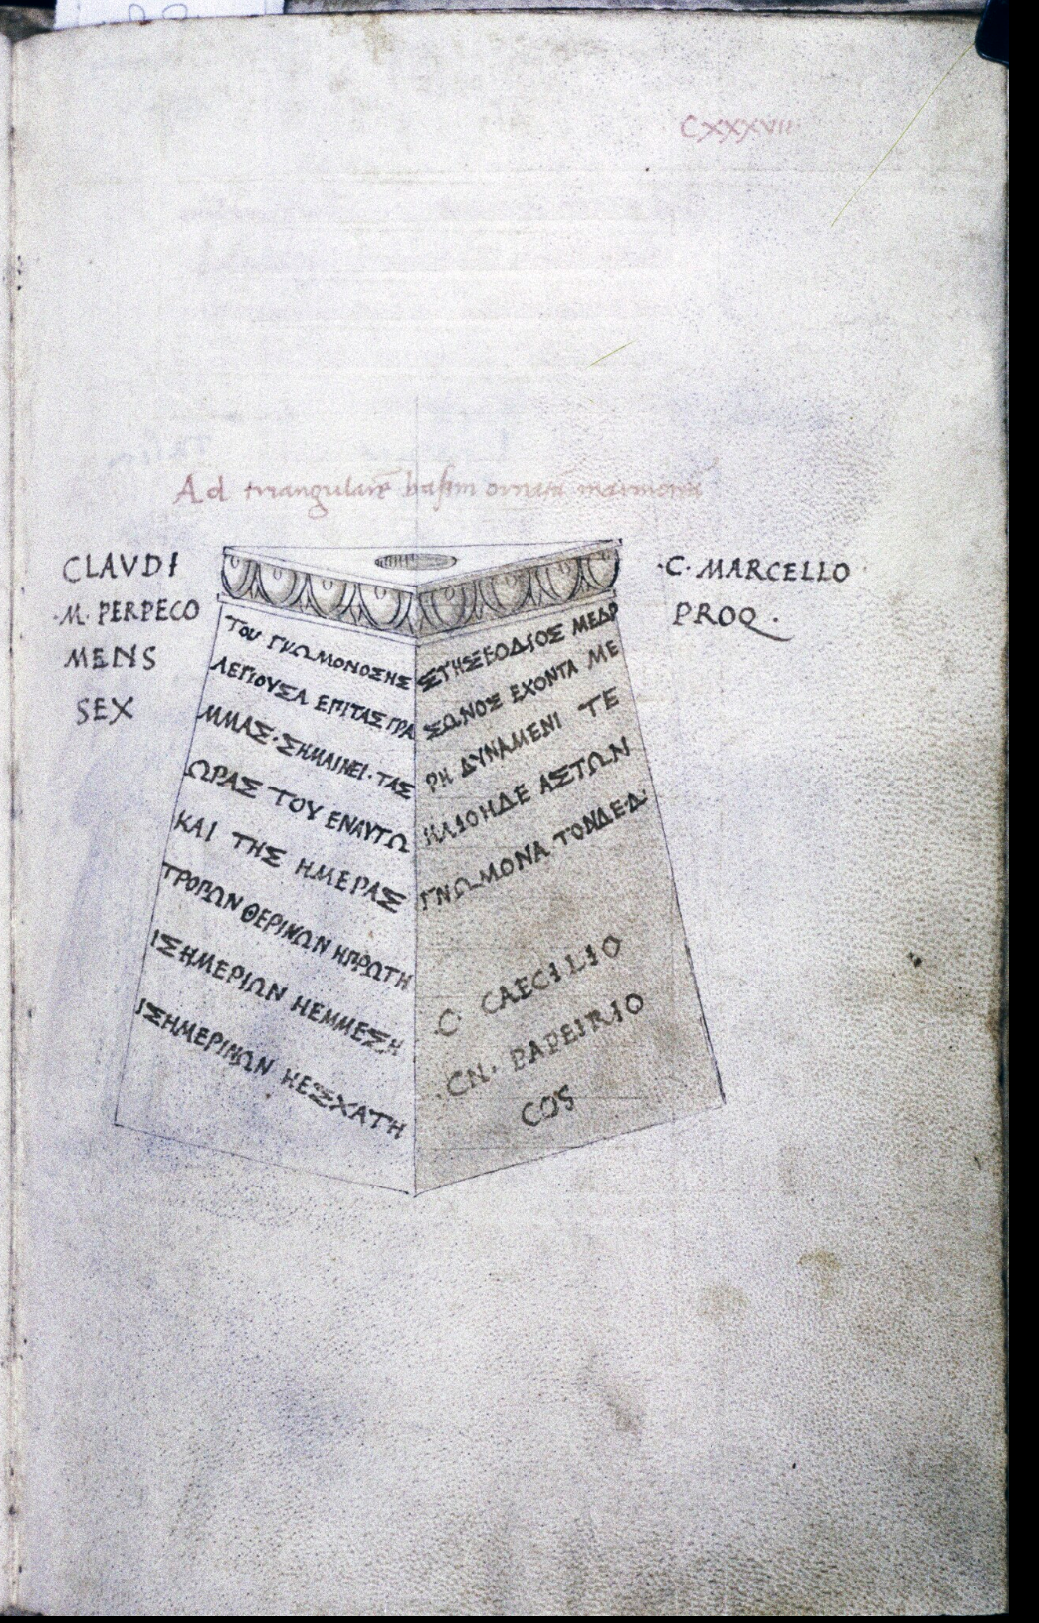 Copy of Cyriacus's drawing of the inscribed base of an ancient sundial on Samothrace, c. 1475, Bodleian MS. lat. misc. d. 85, f. 137r.